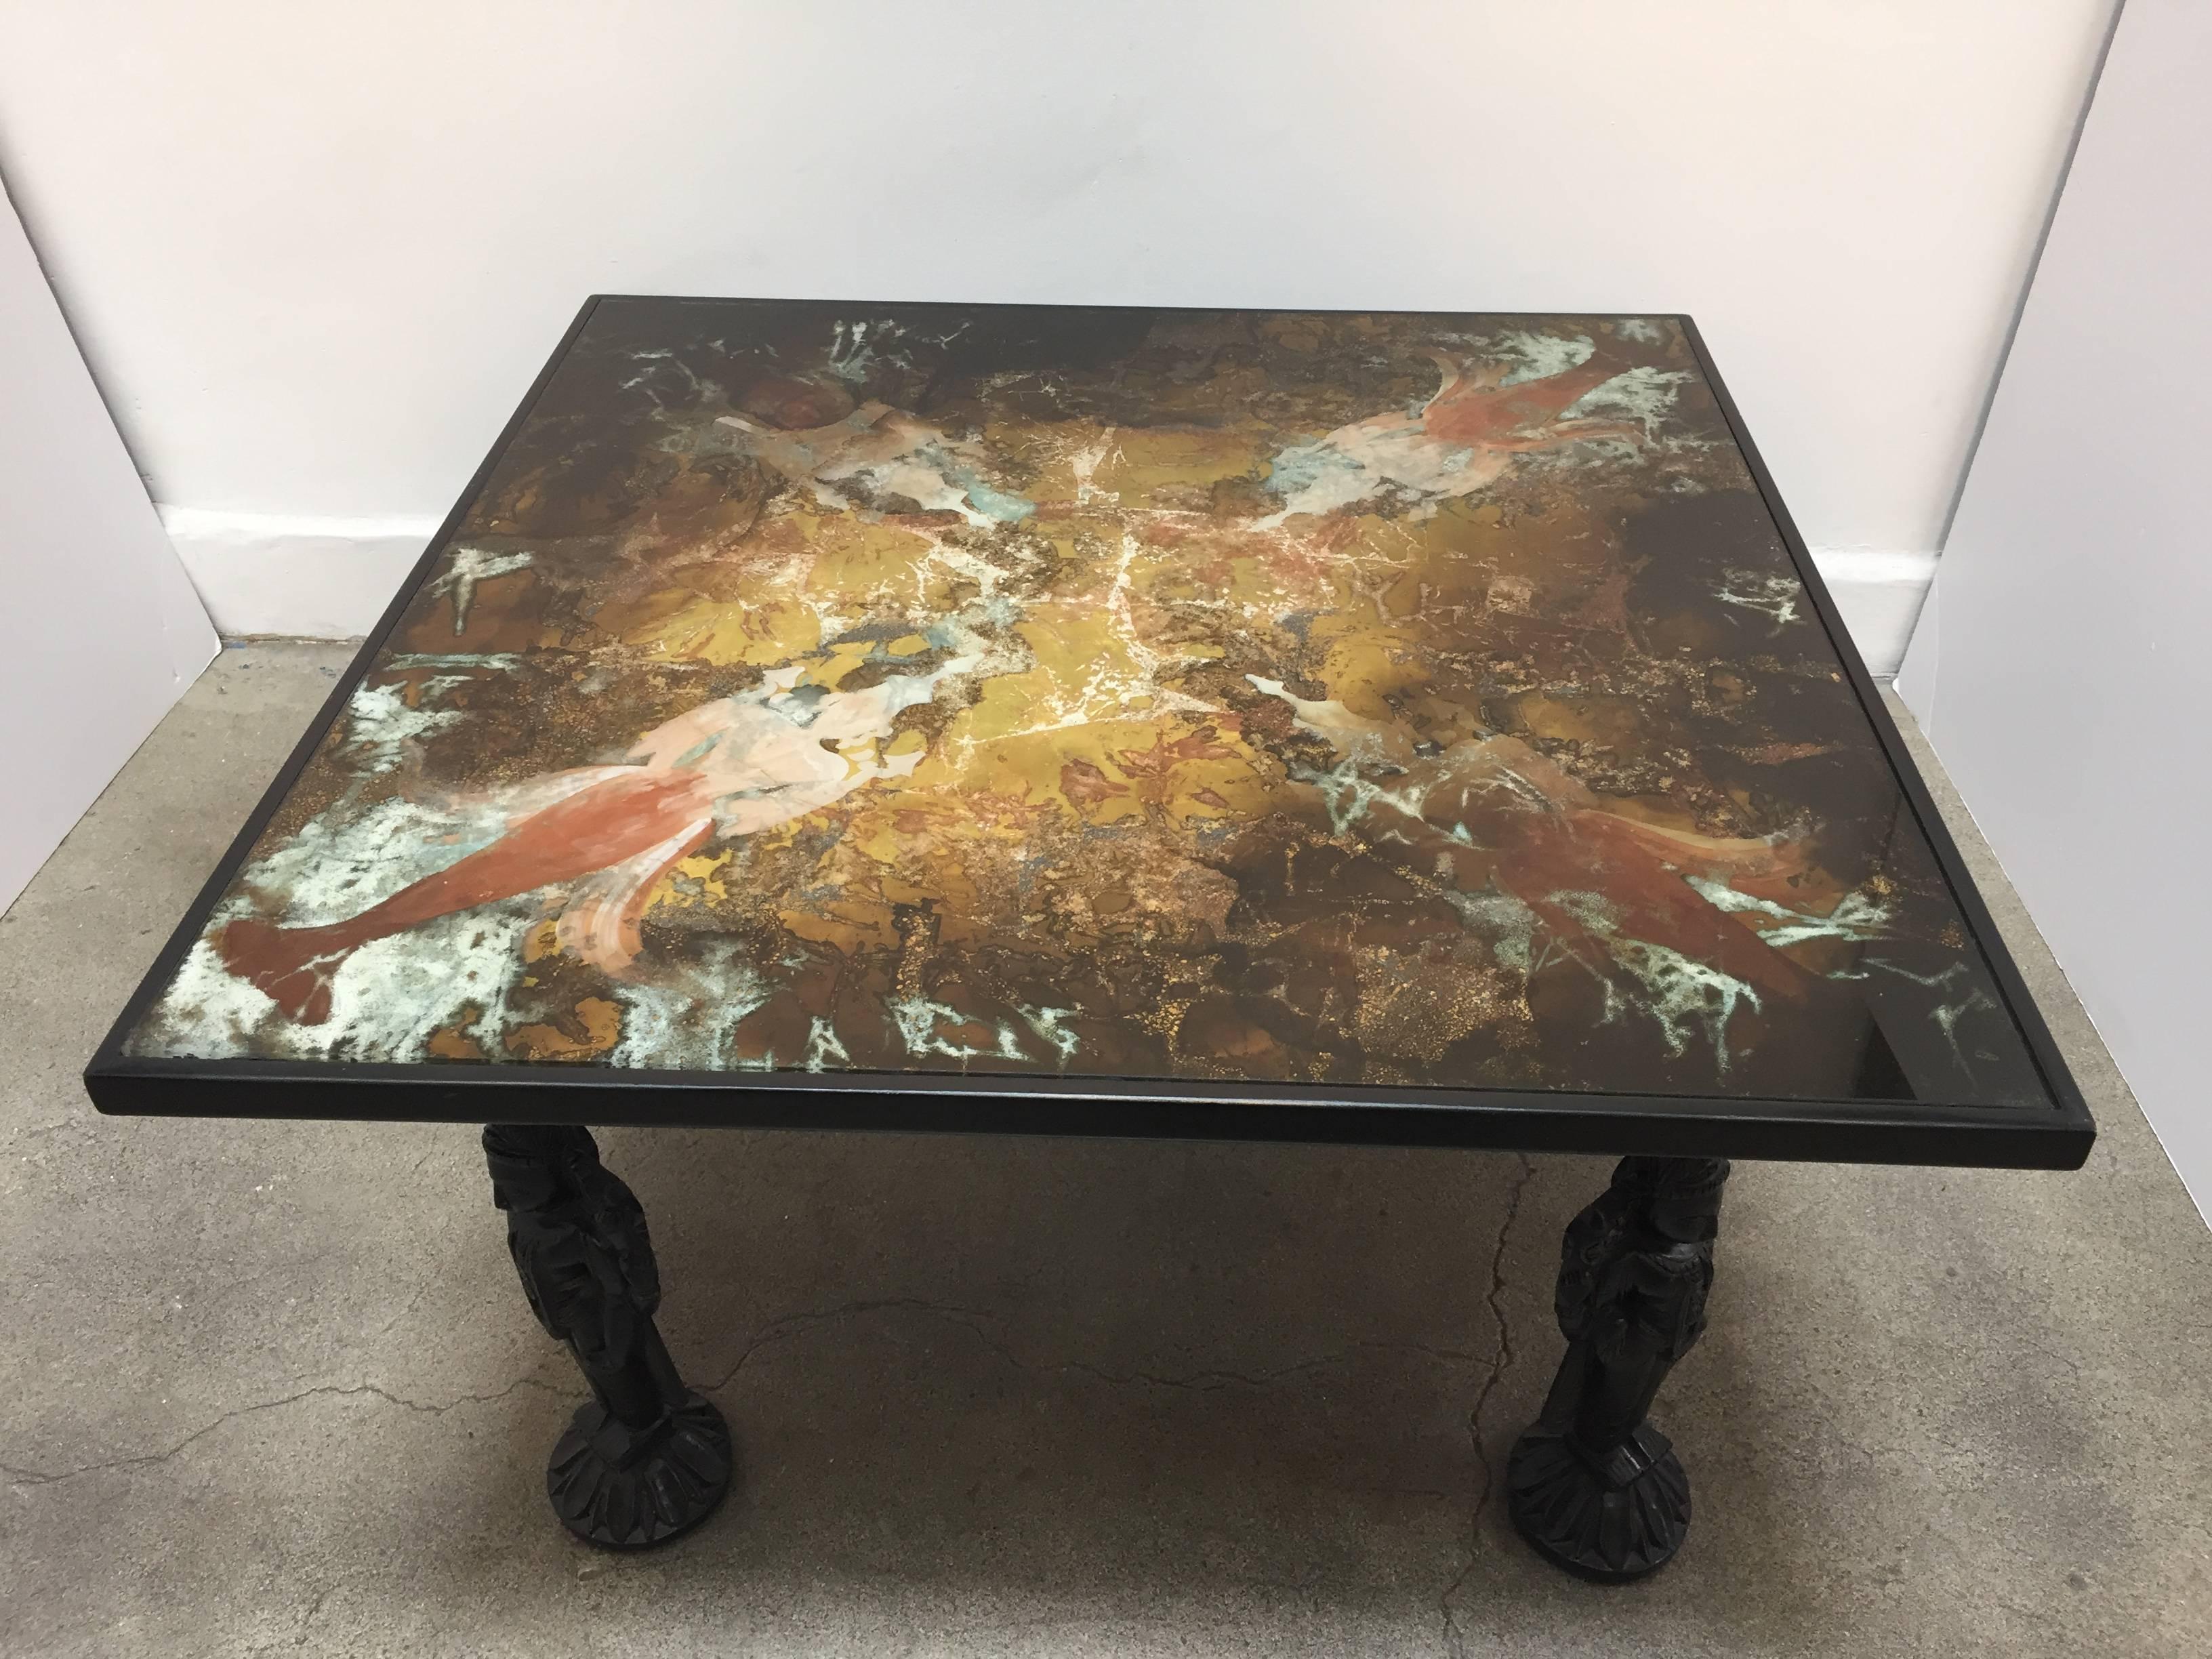 Asian inspire coffee table, with glass top painted in reverse with abstract designs, the four feet represent four Indian god Vishnu on lotus stand.
Black color wood and glass.